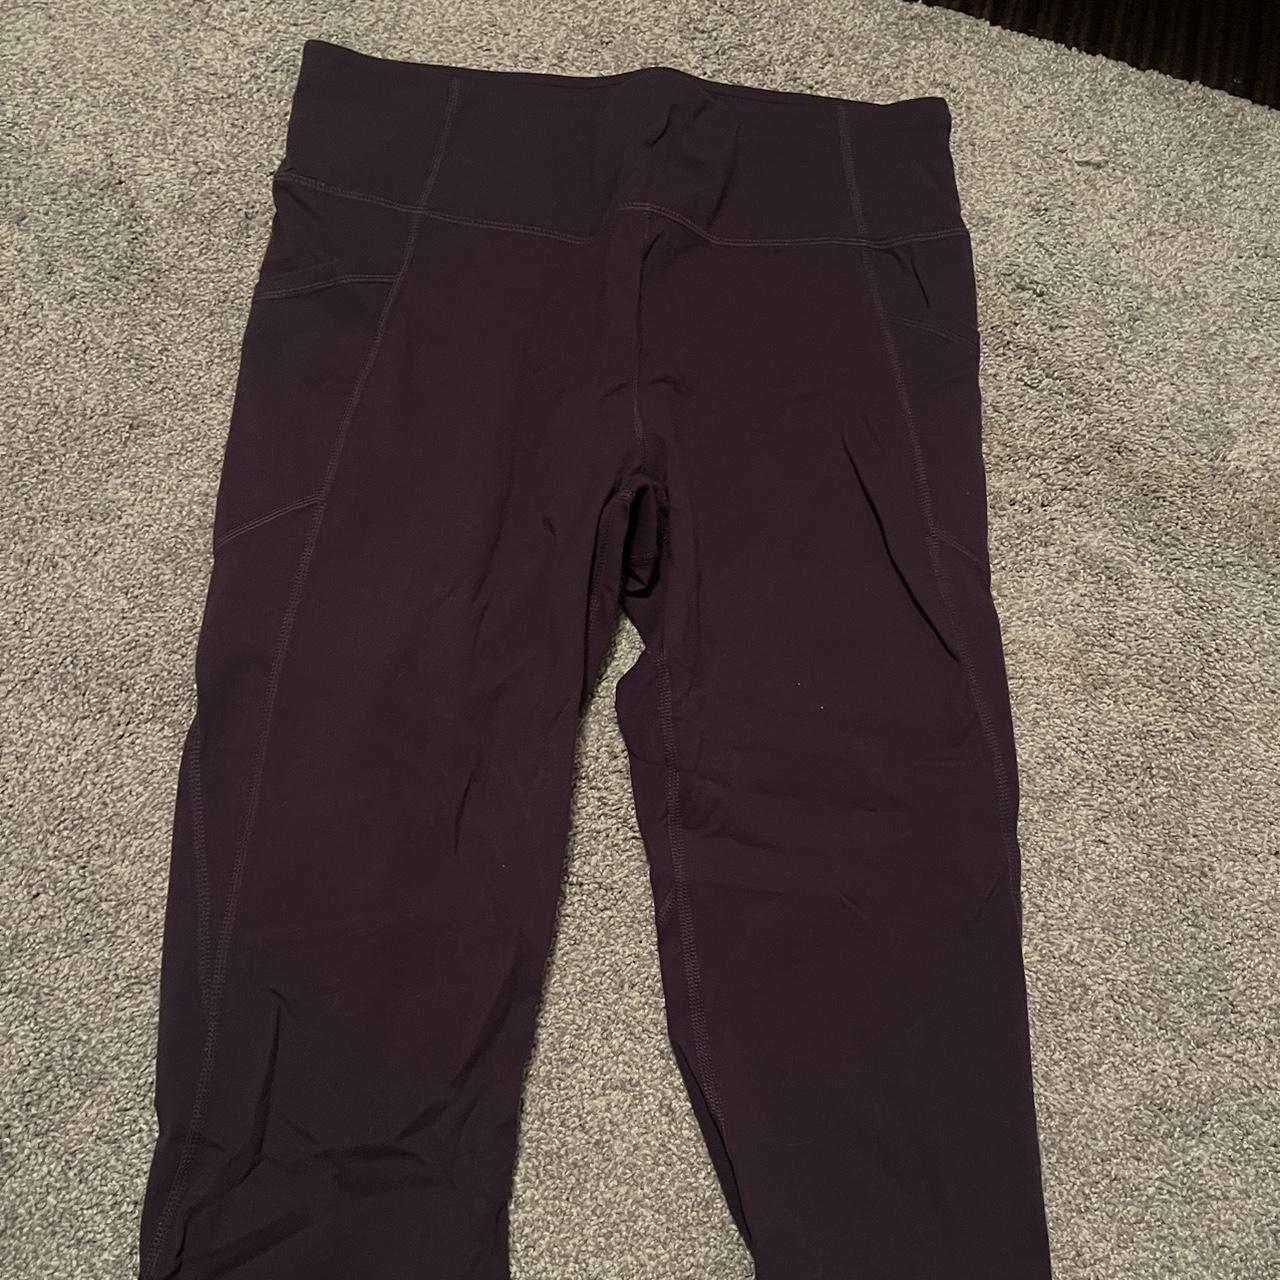 avia workout leggings both are a size large never - Depop